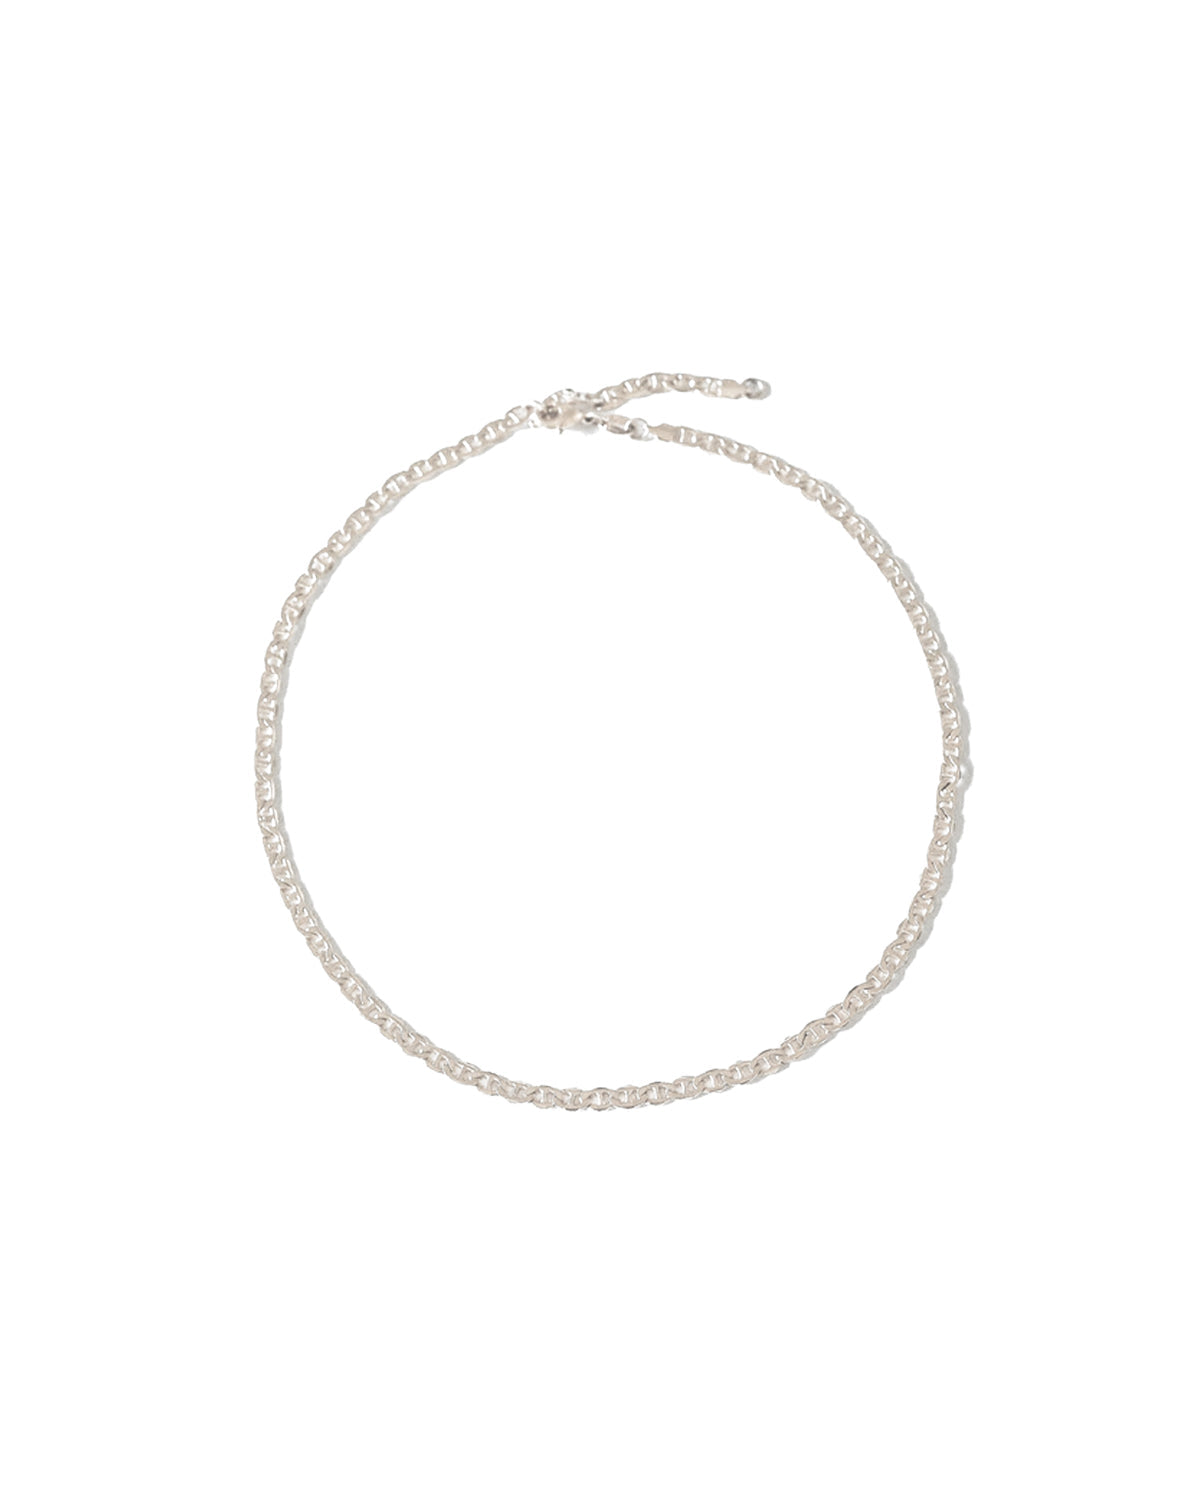 Felicity Chain Necklace -Sterling Silver | S-kin Studio Jewelry | Minimal Jewellery That Lasts